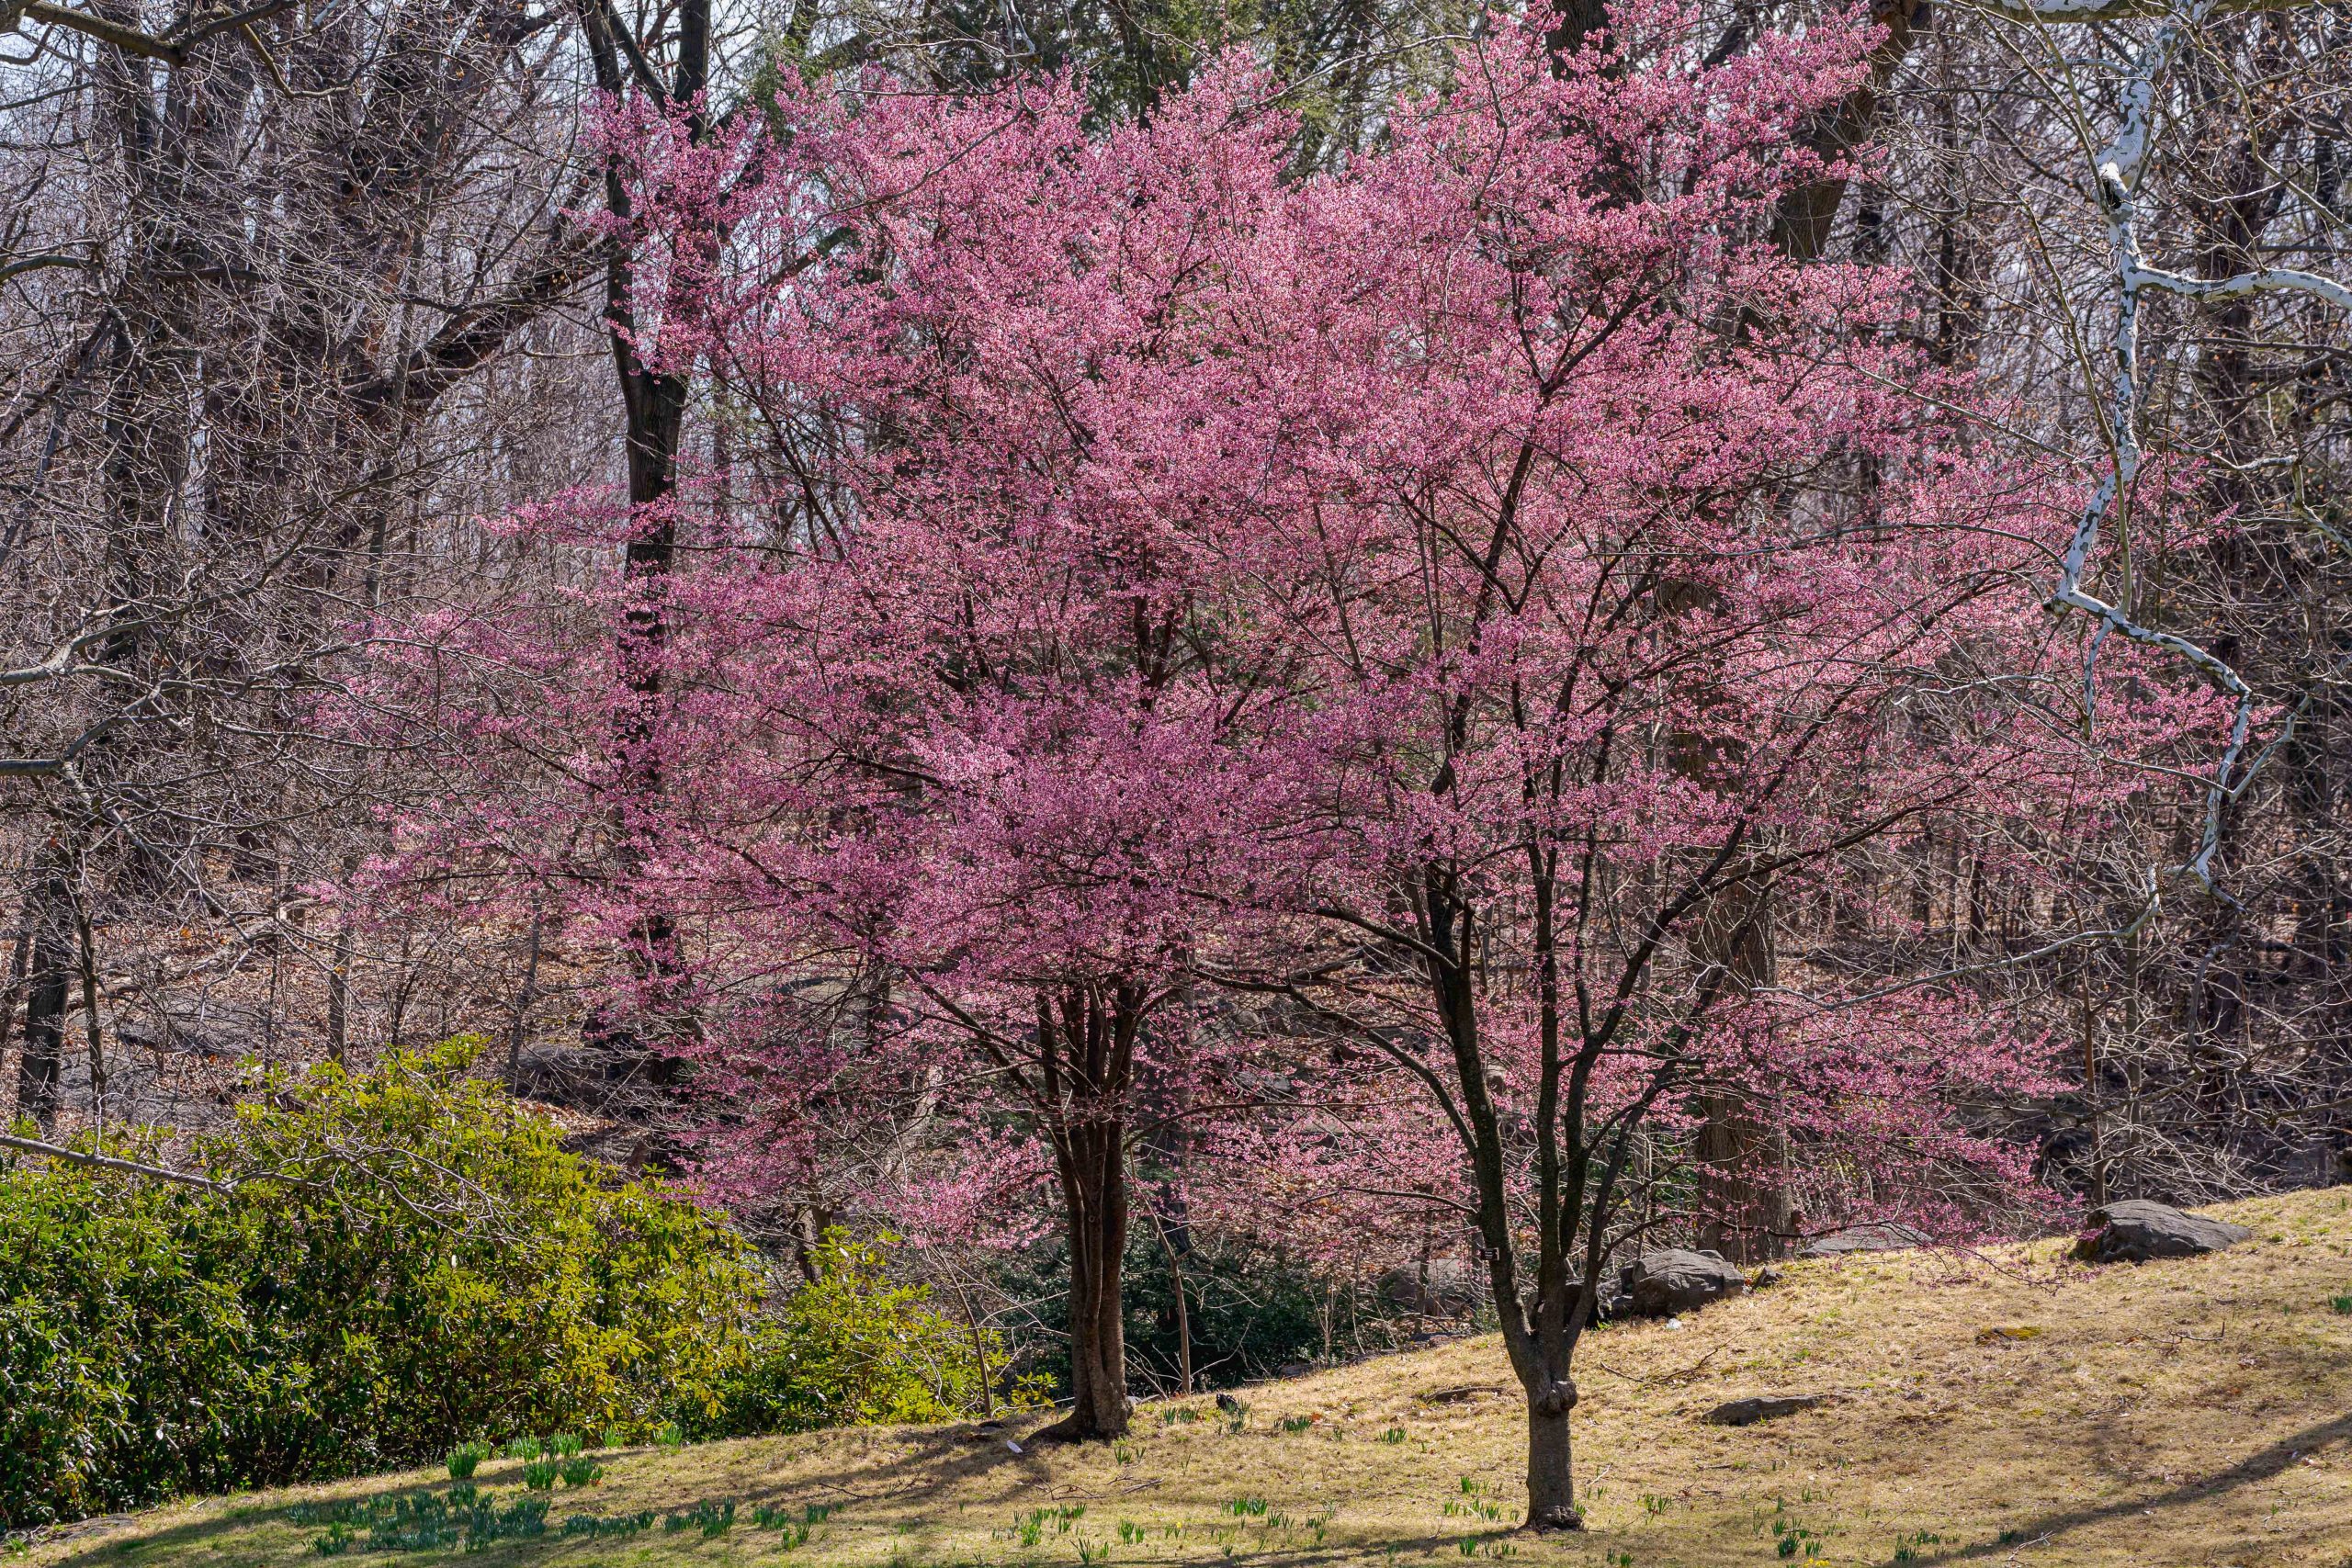 Dark trees bloom with bright pink flowers in a forest scene